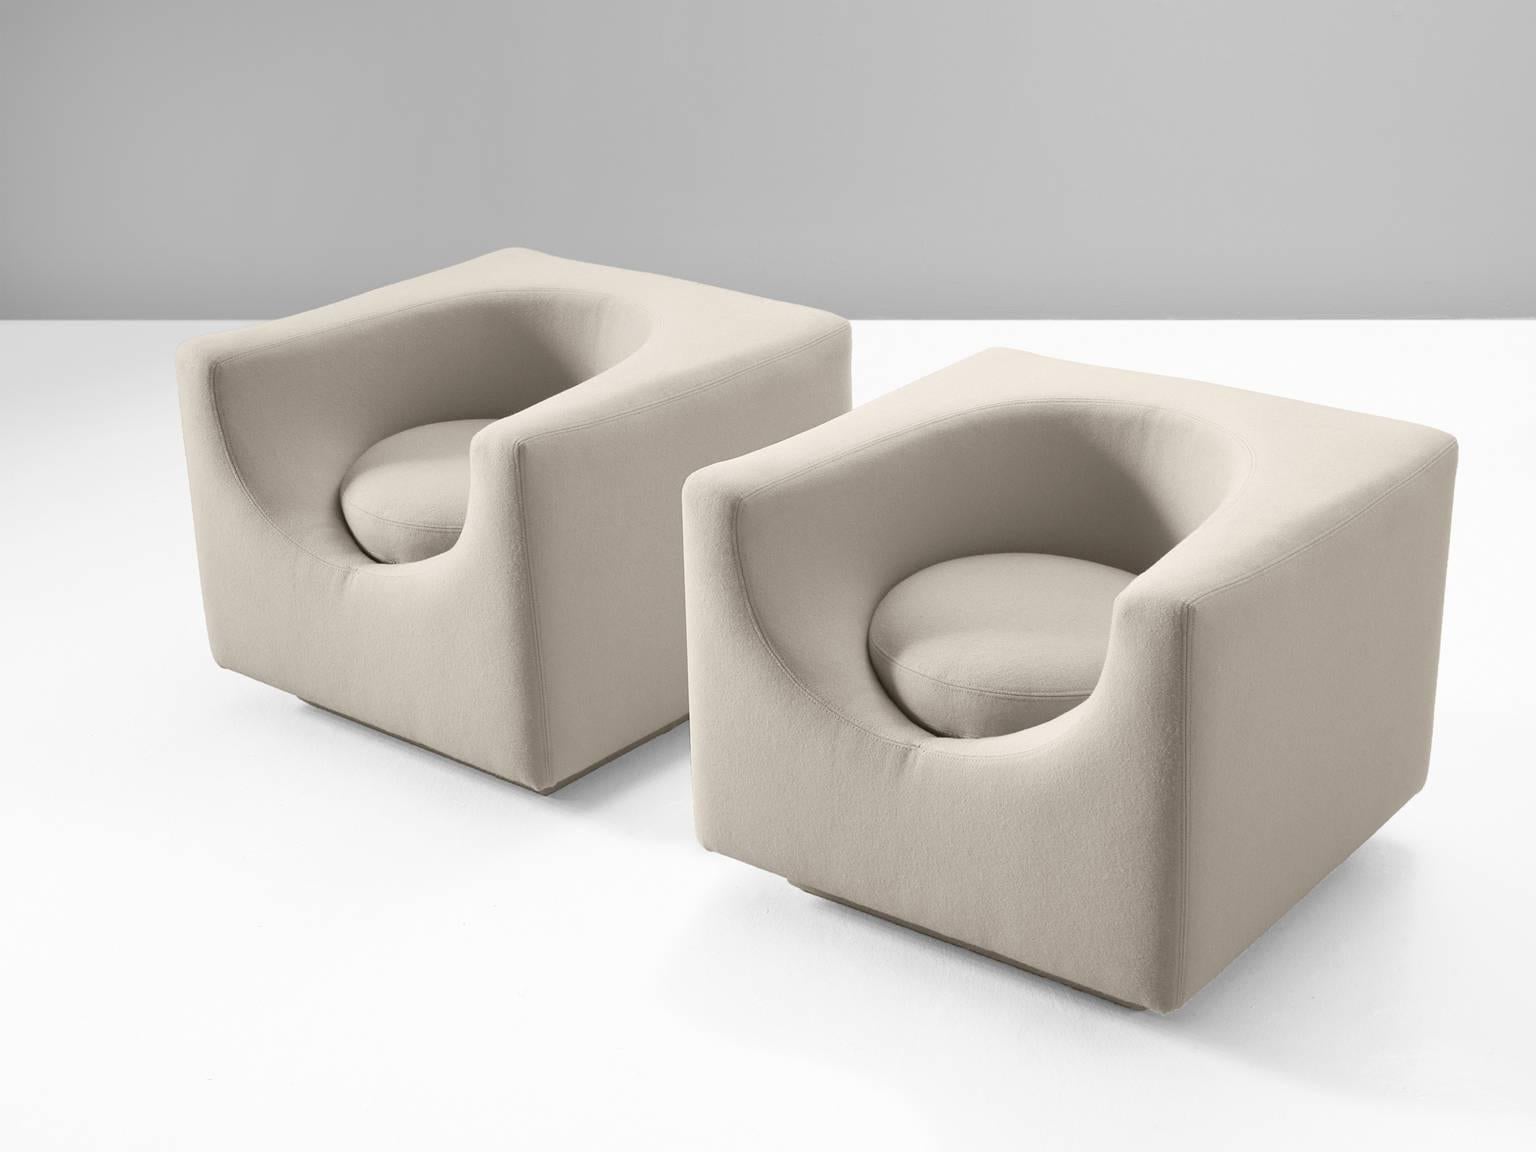 Pair of lounge chairs, fabric, Italy, 1970s.

These incredibly comfortable cubic chairs are newly upholstered in Kvadrat Divina 224 beige. This design, which is both functional and sculptural it a wonderful example of Italian postwar design. They